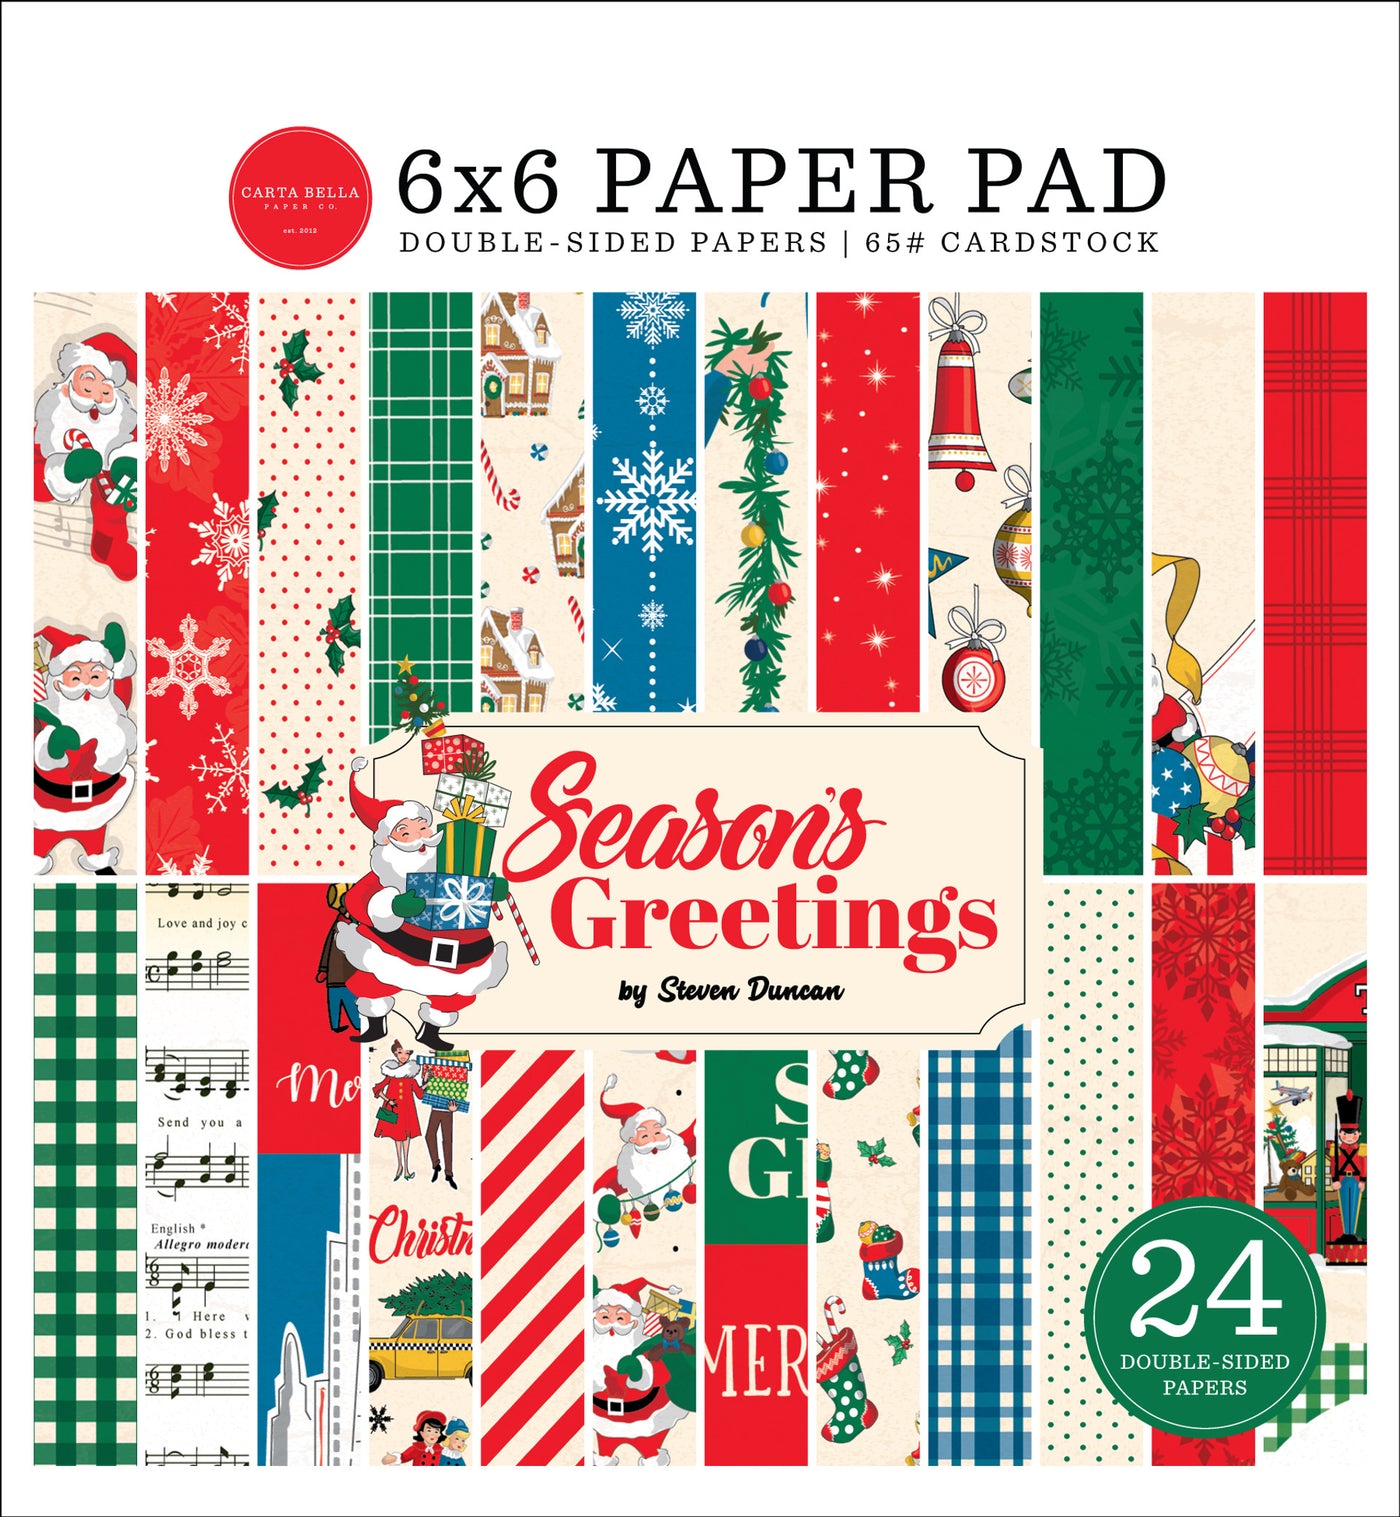 SEASON'S GREETINGS 6x6 Paper Pad from Carta Bella - 6x6 pad with 24 double-sided sheets. Scaled-down images are great for card making and similar crafts. Pad has a brightly colored Christmas theme with gingerbread!